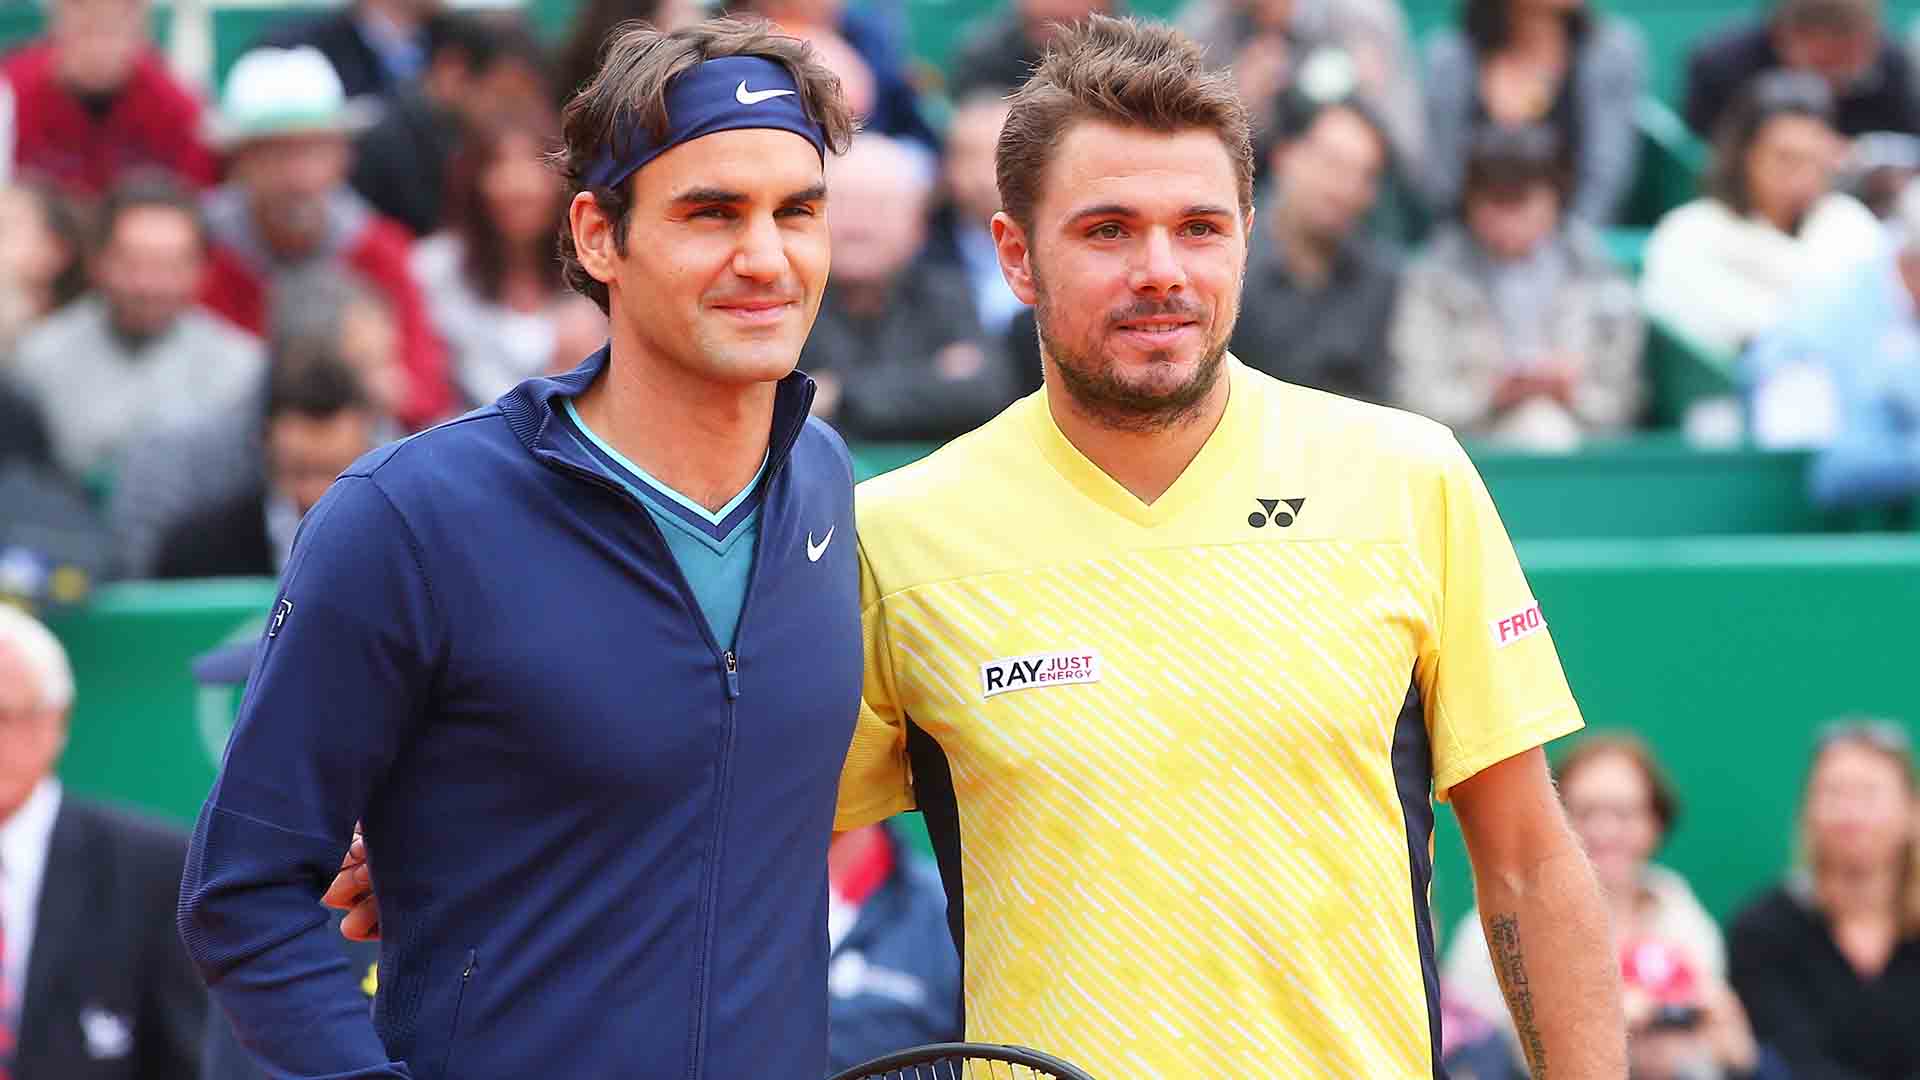 <a href='https://www.atptour.com/en/players/roger-federer/f324/overview'>Roger Federer</a> entered the 2014 <a href='https://www.atptour.com/en/tournaments/monte-carlo/410/overview'>Rolex Monte-Carlo Masters</a> final with a 13-1 ATP Head2Head record against <a href='https://www.atptour.com/en/players/stan-wawrinka/w367/overview'>Stan Wawrinka</a>.